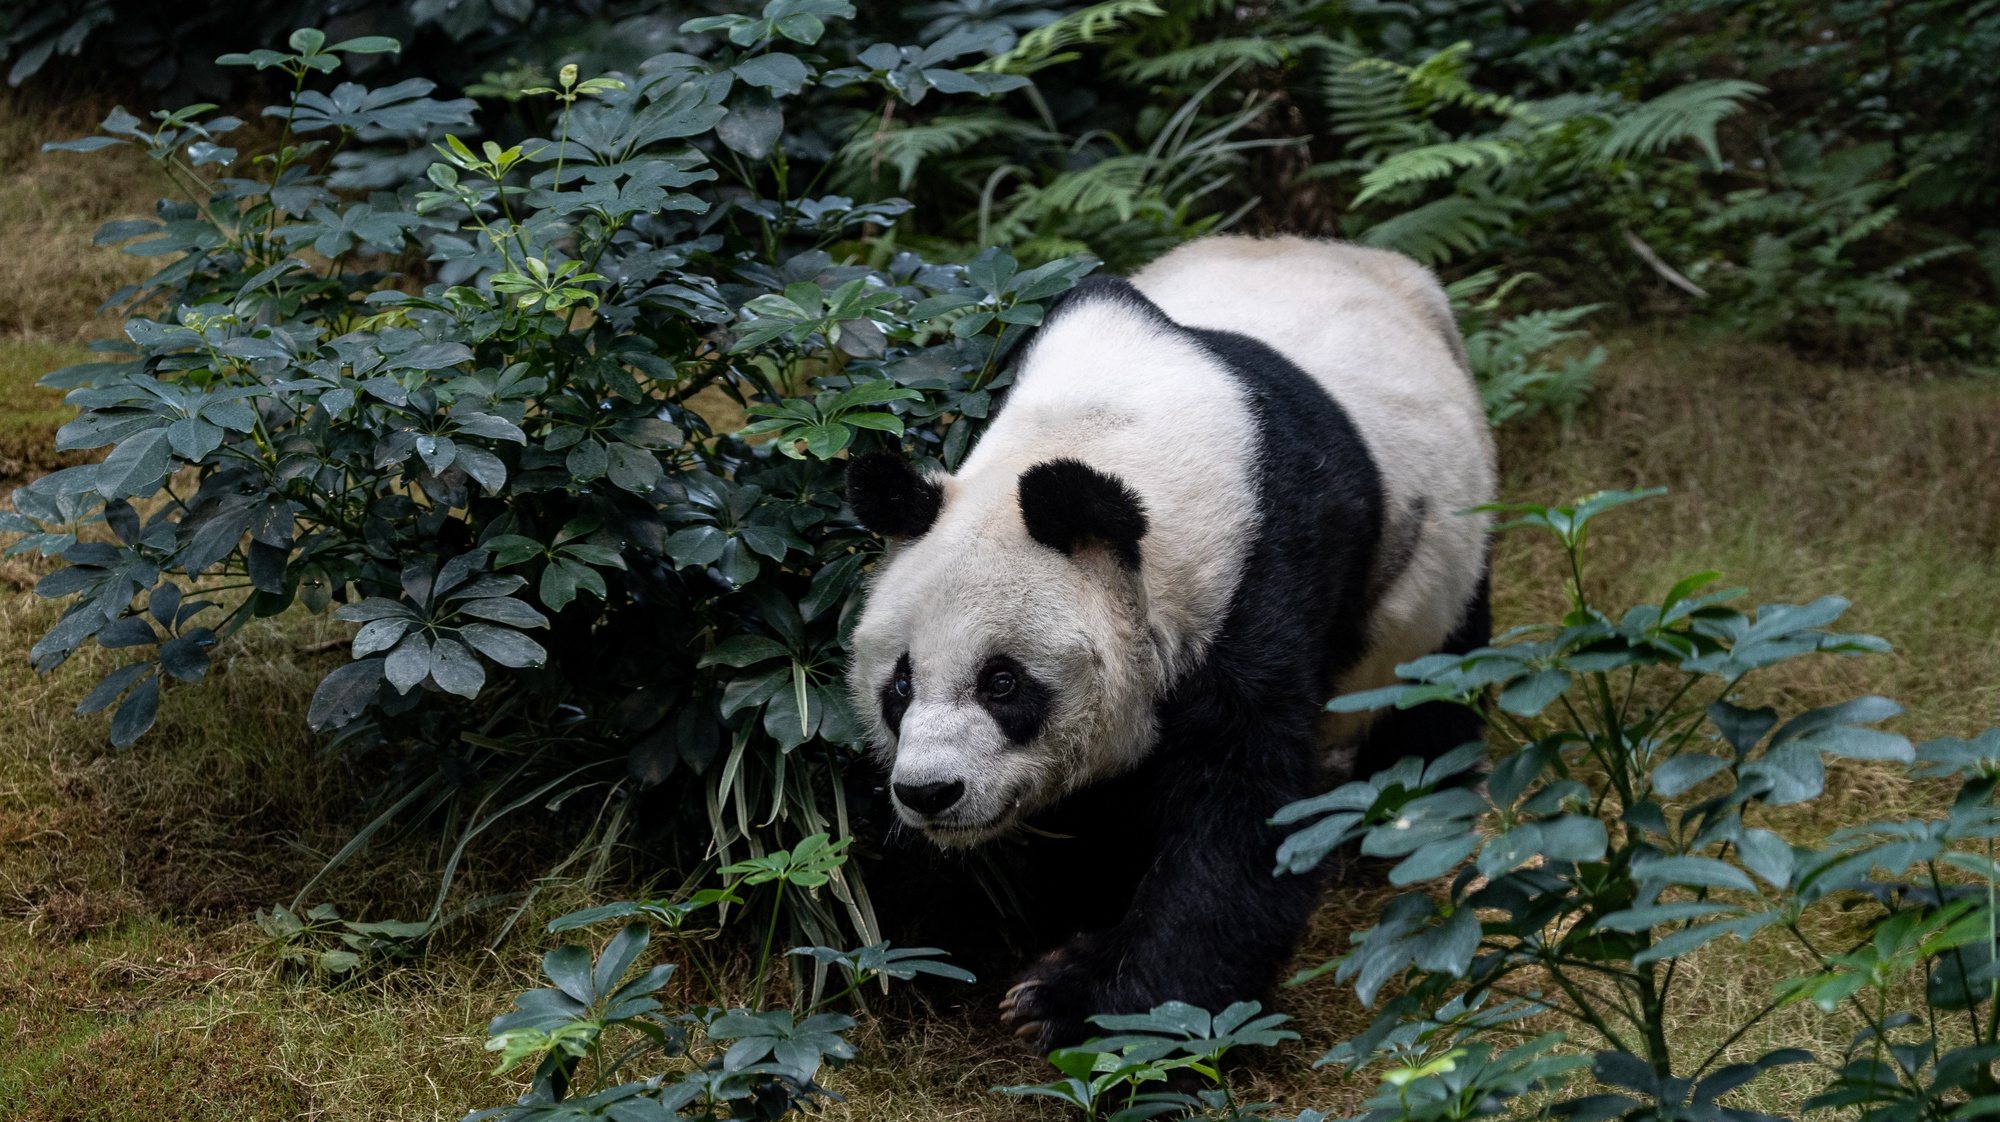 epa08692981 Giant panda An An walks in its enclosure at Ocean Park in Hong Kong, China, 24 September 2020. An An turned 35 in August. Giant pandas in the wild can live up to 20 years on average, while lifespans of those under human care can reach over 30 years.  EPA/JEROME FAVRE